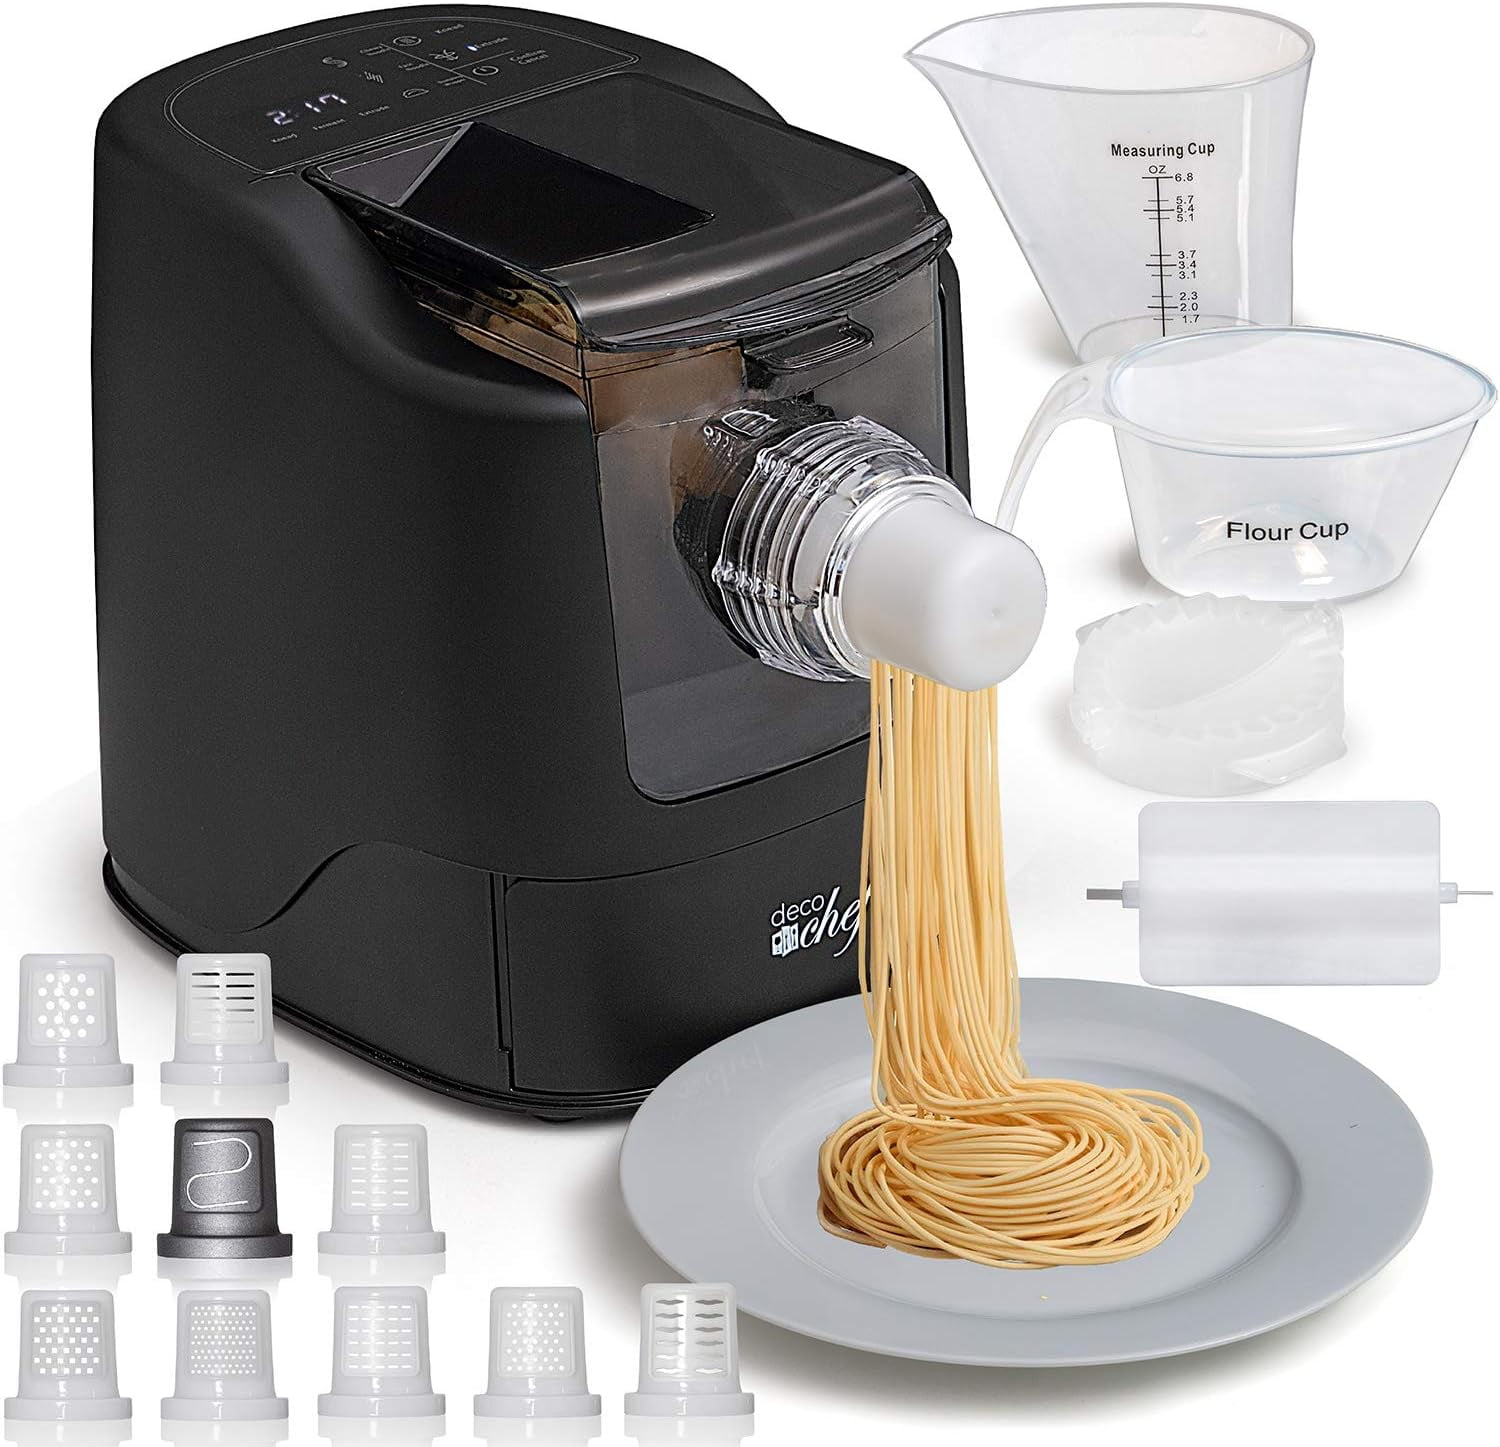 This Pasta Maker Is My Newest Obsession (+ More Cool Refurbished